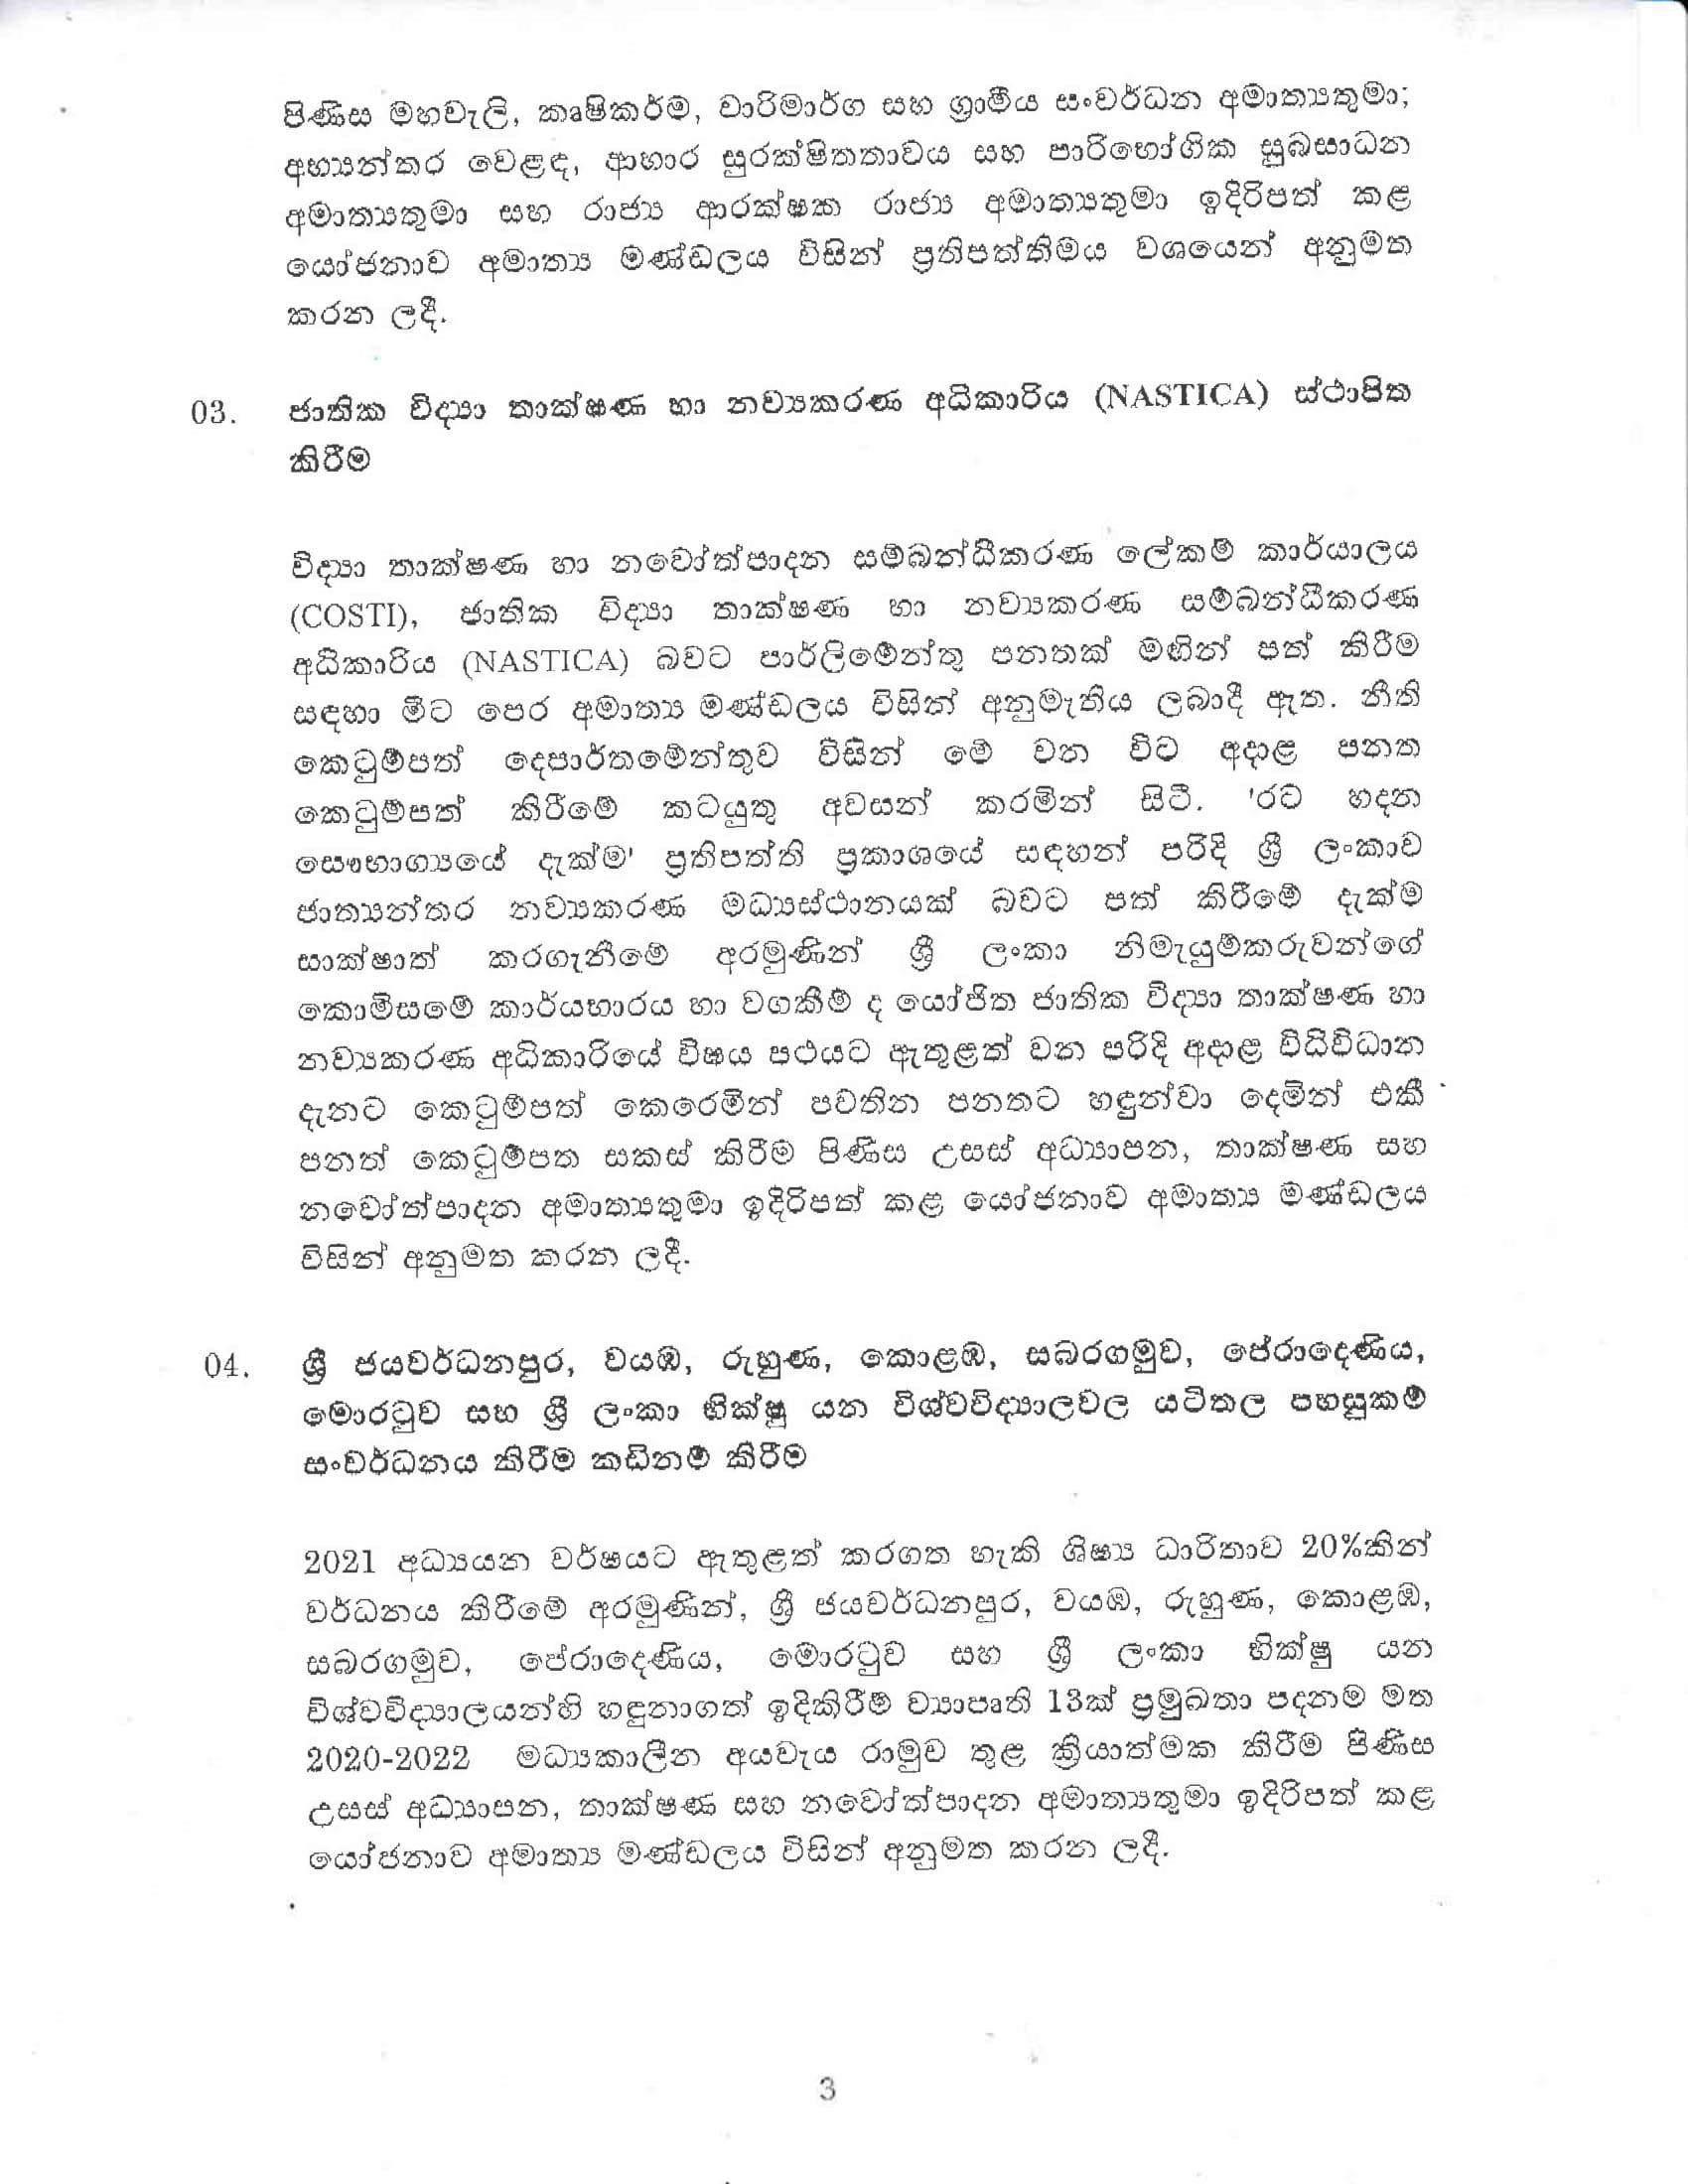 Cabinet Decision on 22.01.2020Full document 3